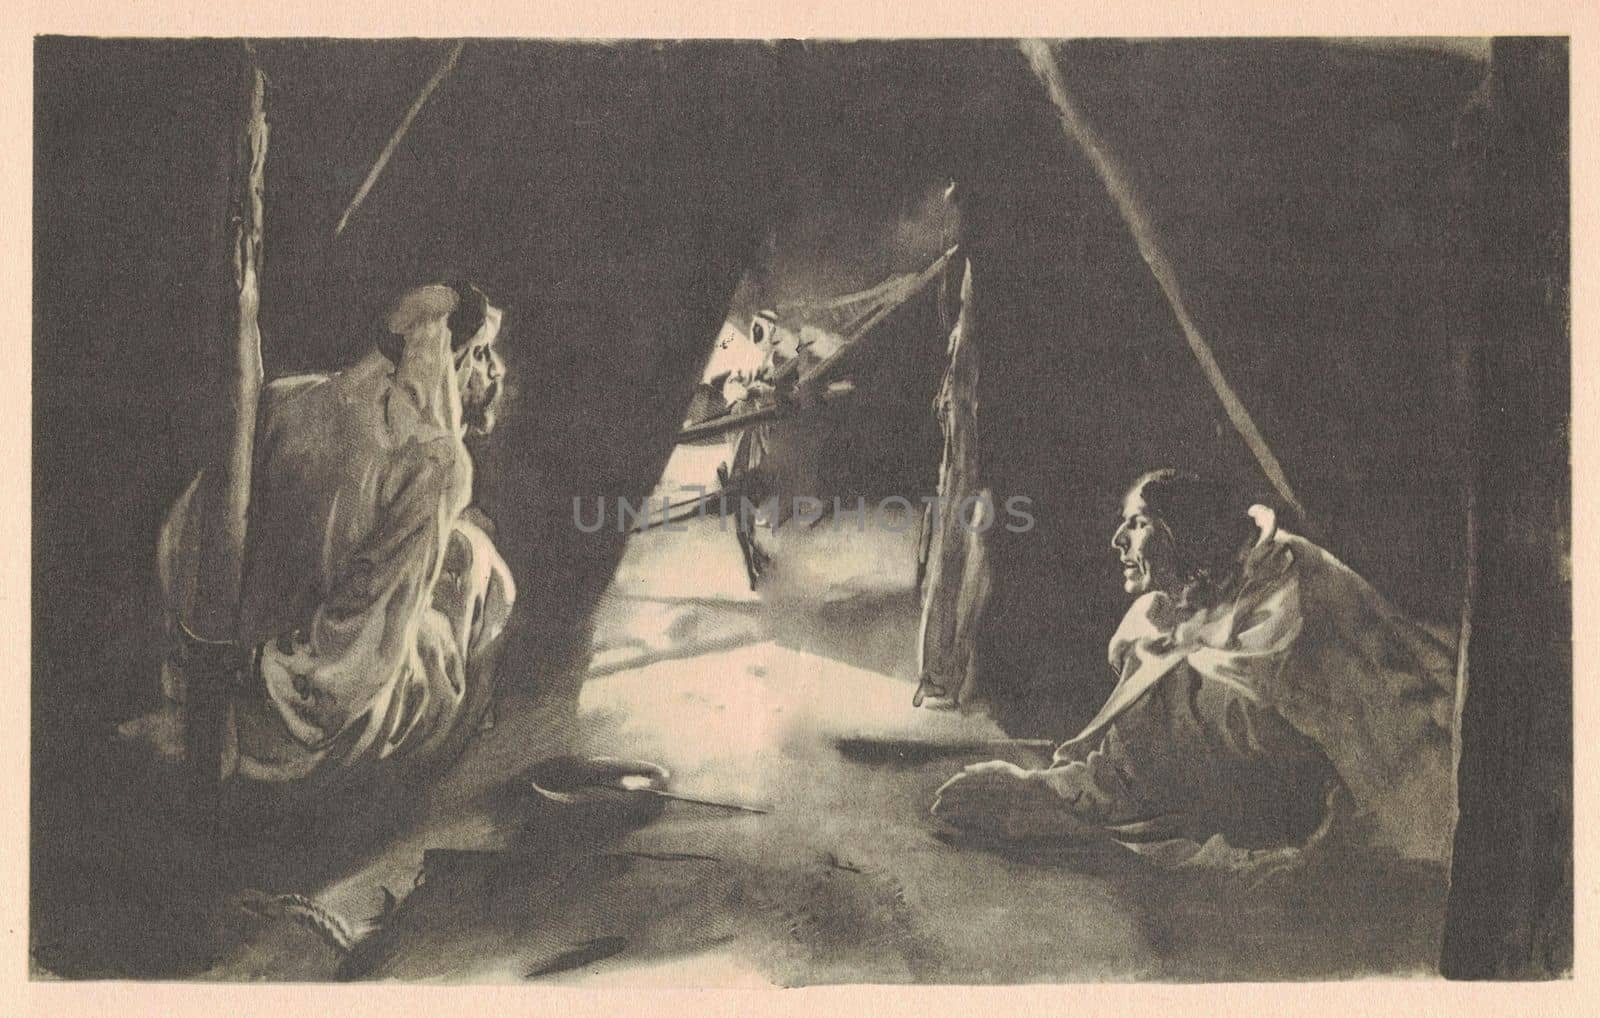 Black and white illustration shows a captured Arab man in the Bedouin tent. Vintage black and white picture shows adventure life in the previous century by roman_nerud